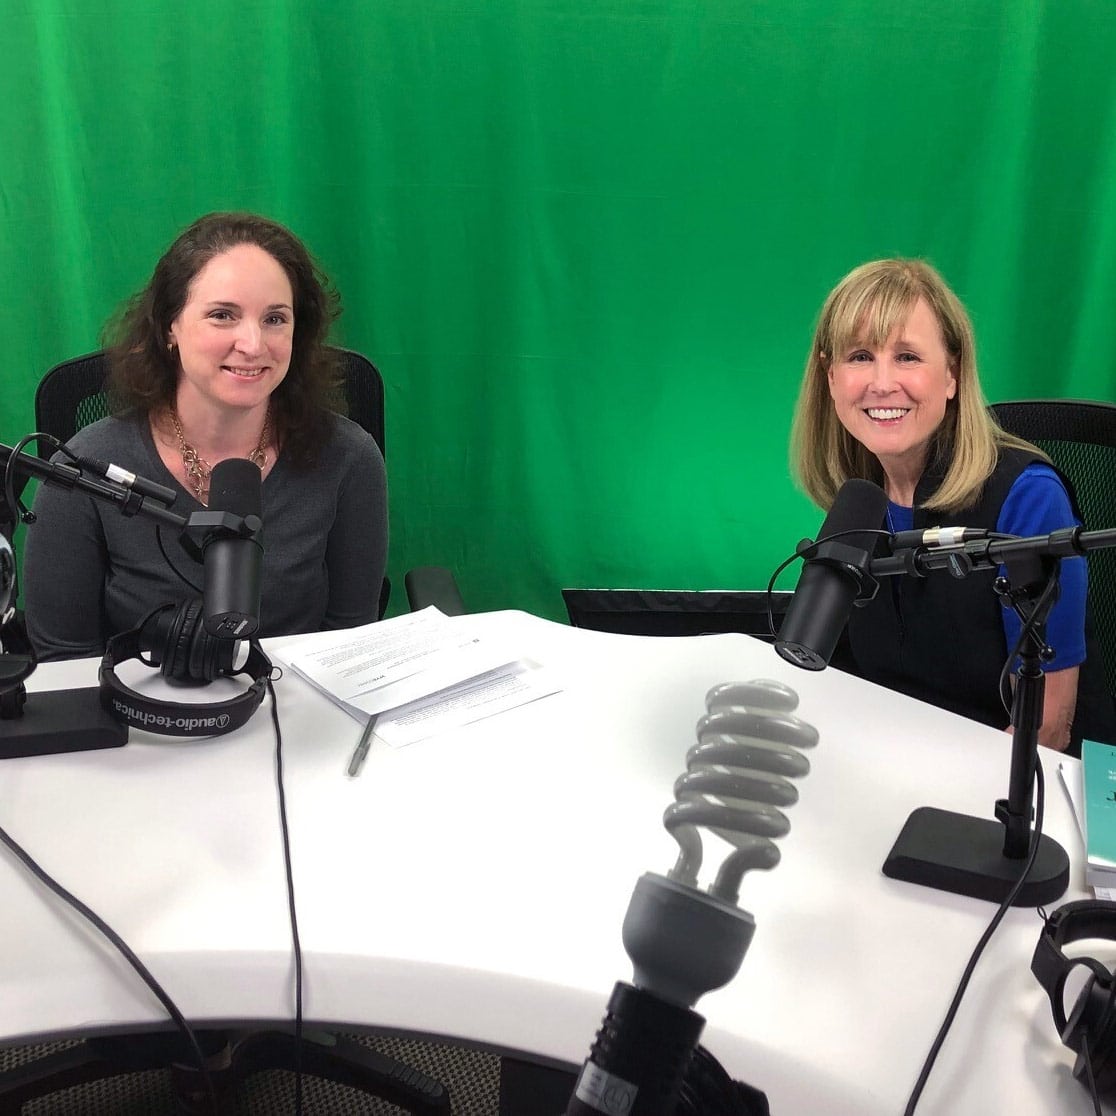 Rival HR Workforce 2030 podcast guests Alexandra Levit and Marti Konstant